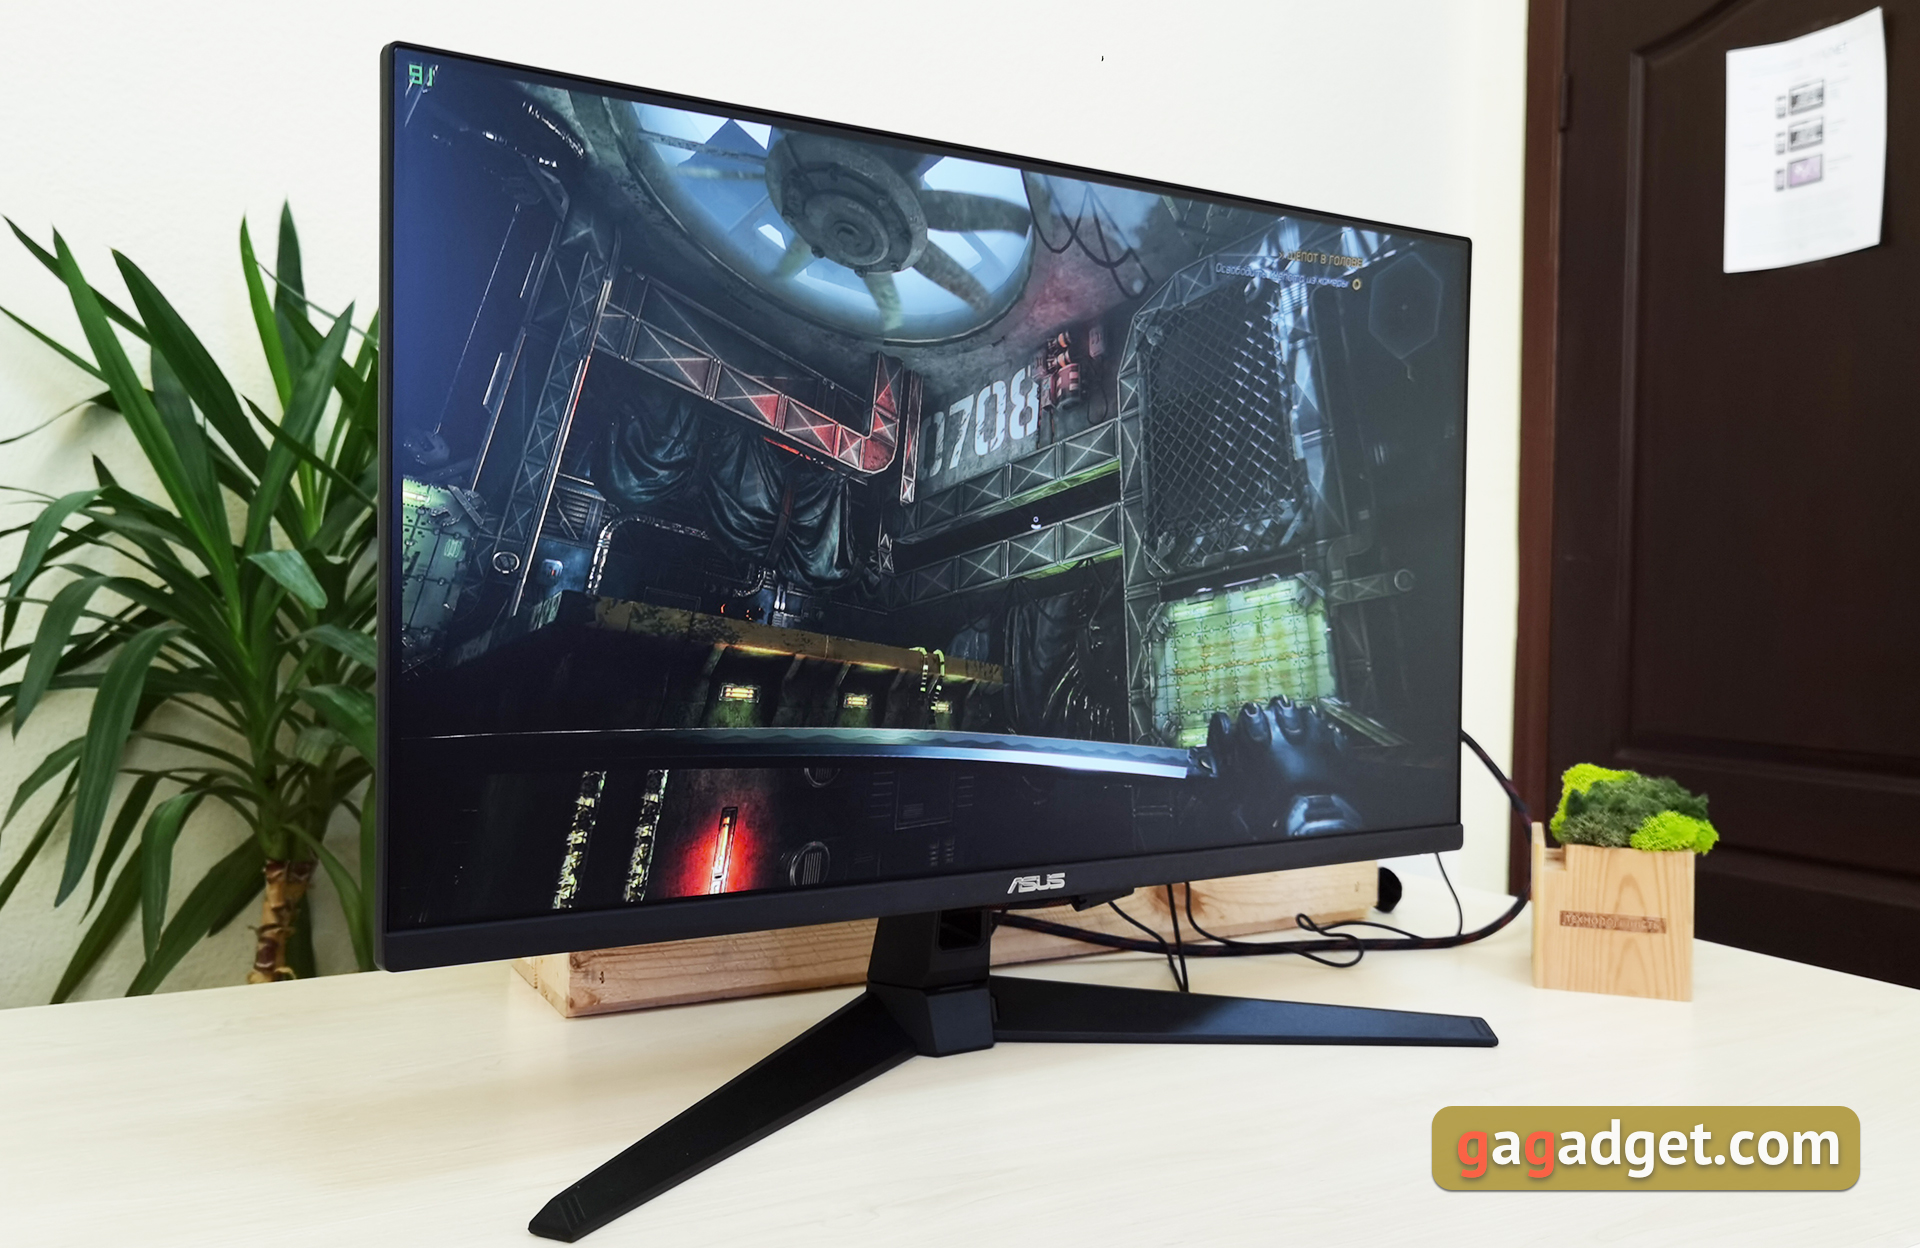 ASUS TUF Gaming VG279Q1A review: 27-inch gaming monitor with IPS panel and 165 Hz refresh rate-73